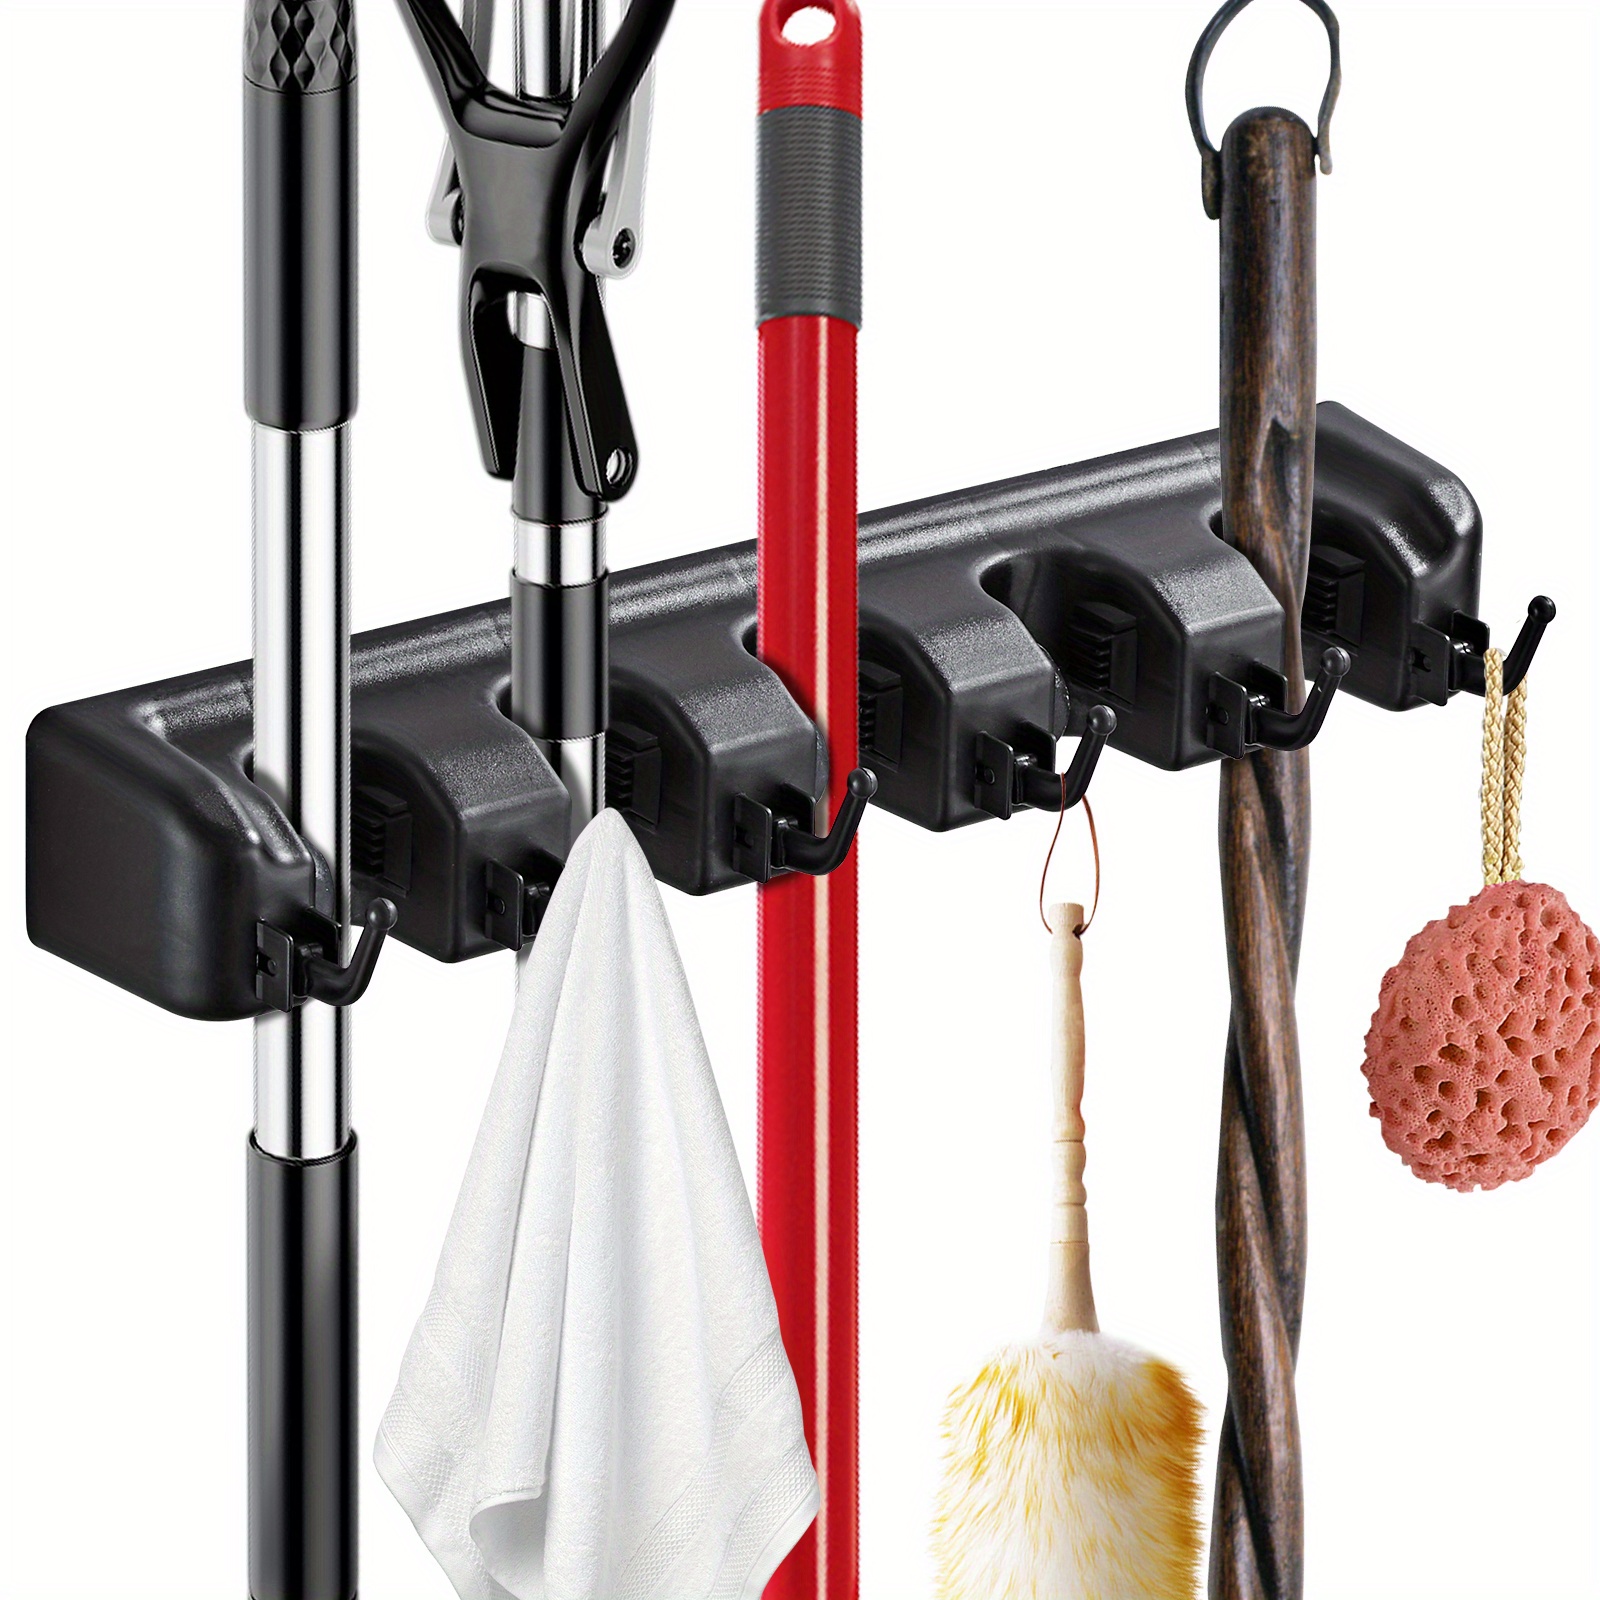 U.S. Solid Mop and Broom Holder, Wall Mounted, 4 Slots & 4 Hooks, Garden Tool Organizer, 16 Inches